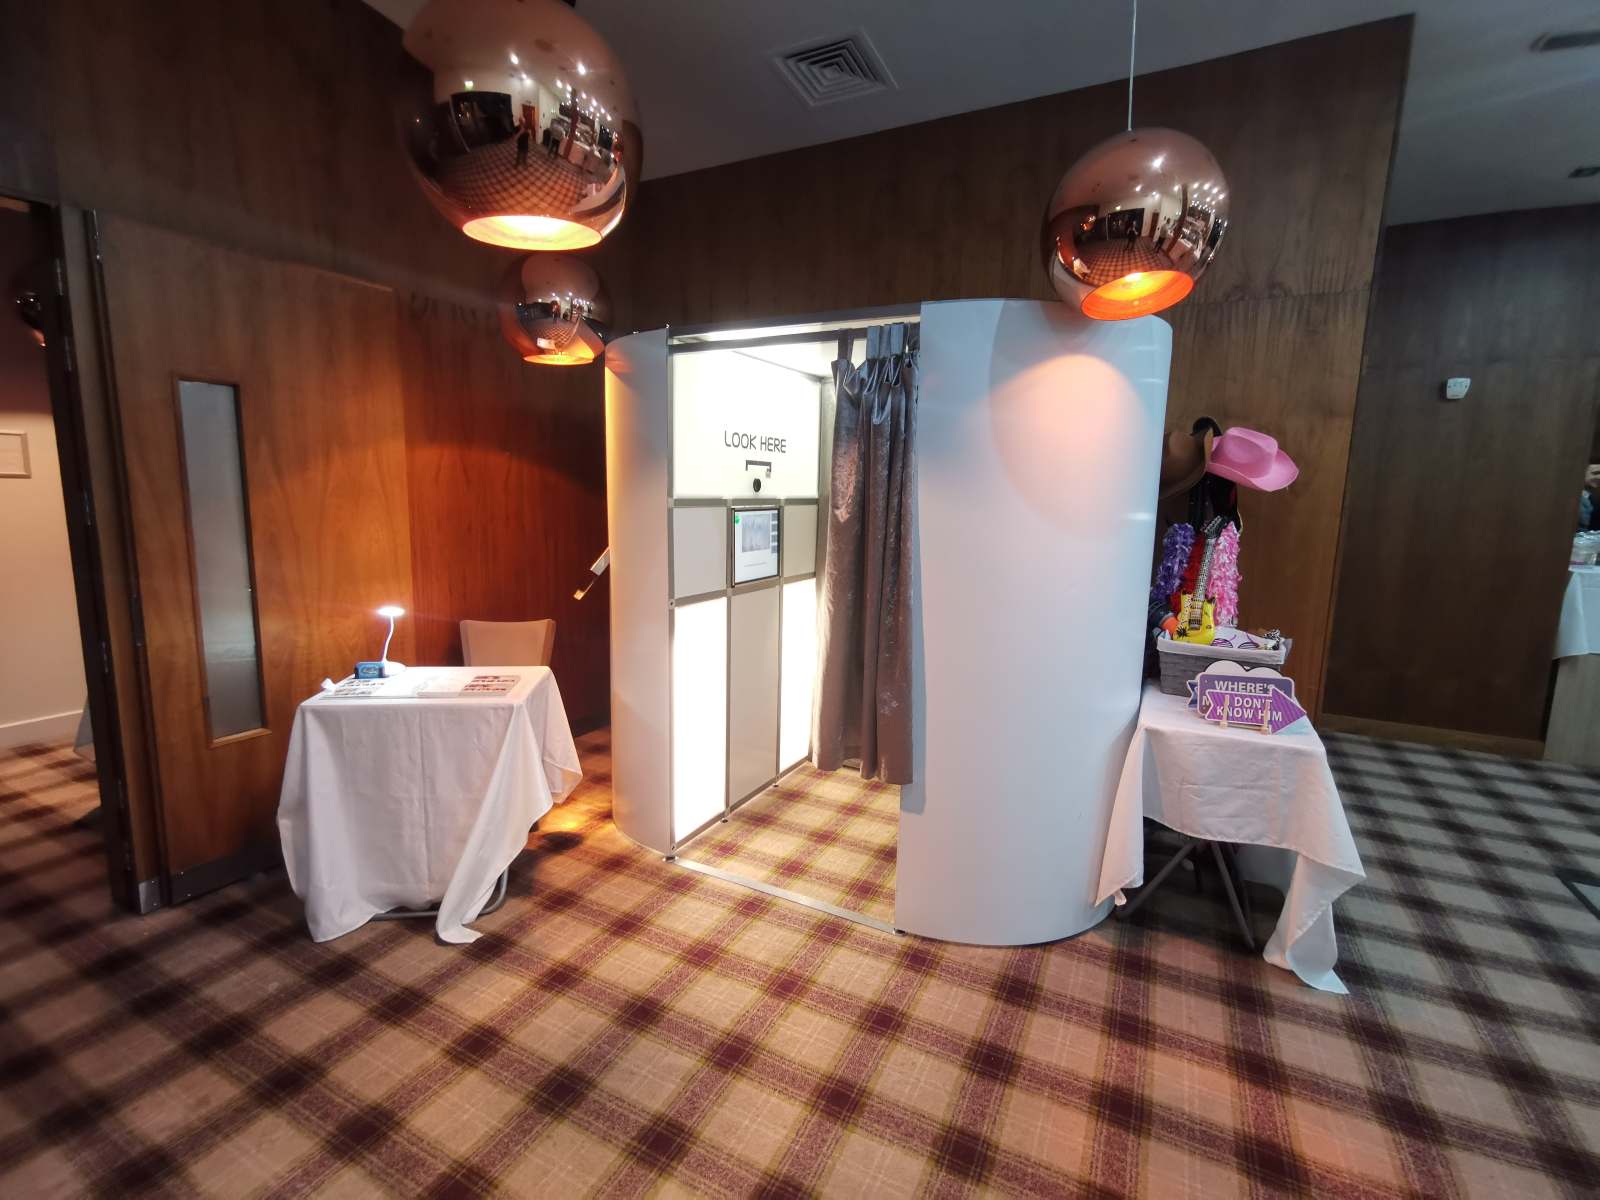 Photo Booth Hire in Leeds, Yorkshire, Sheffield, And York